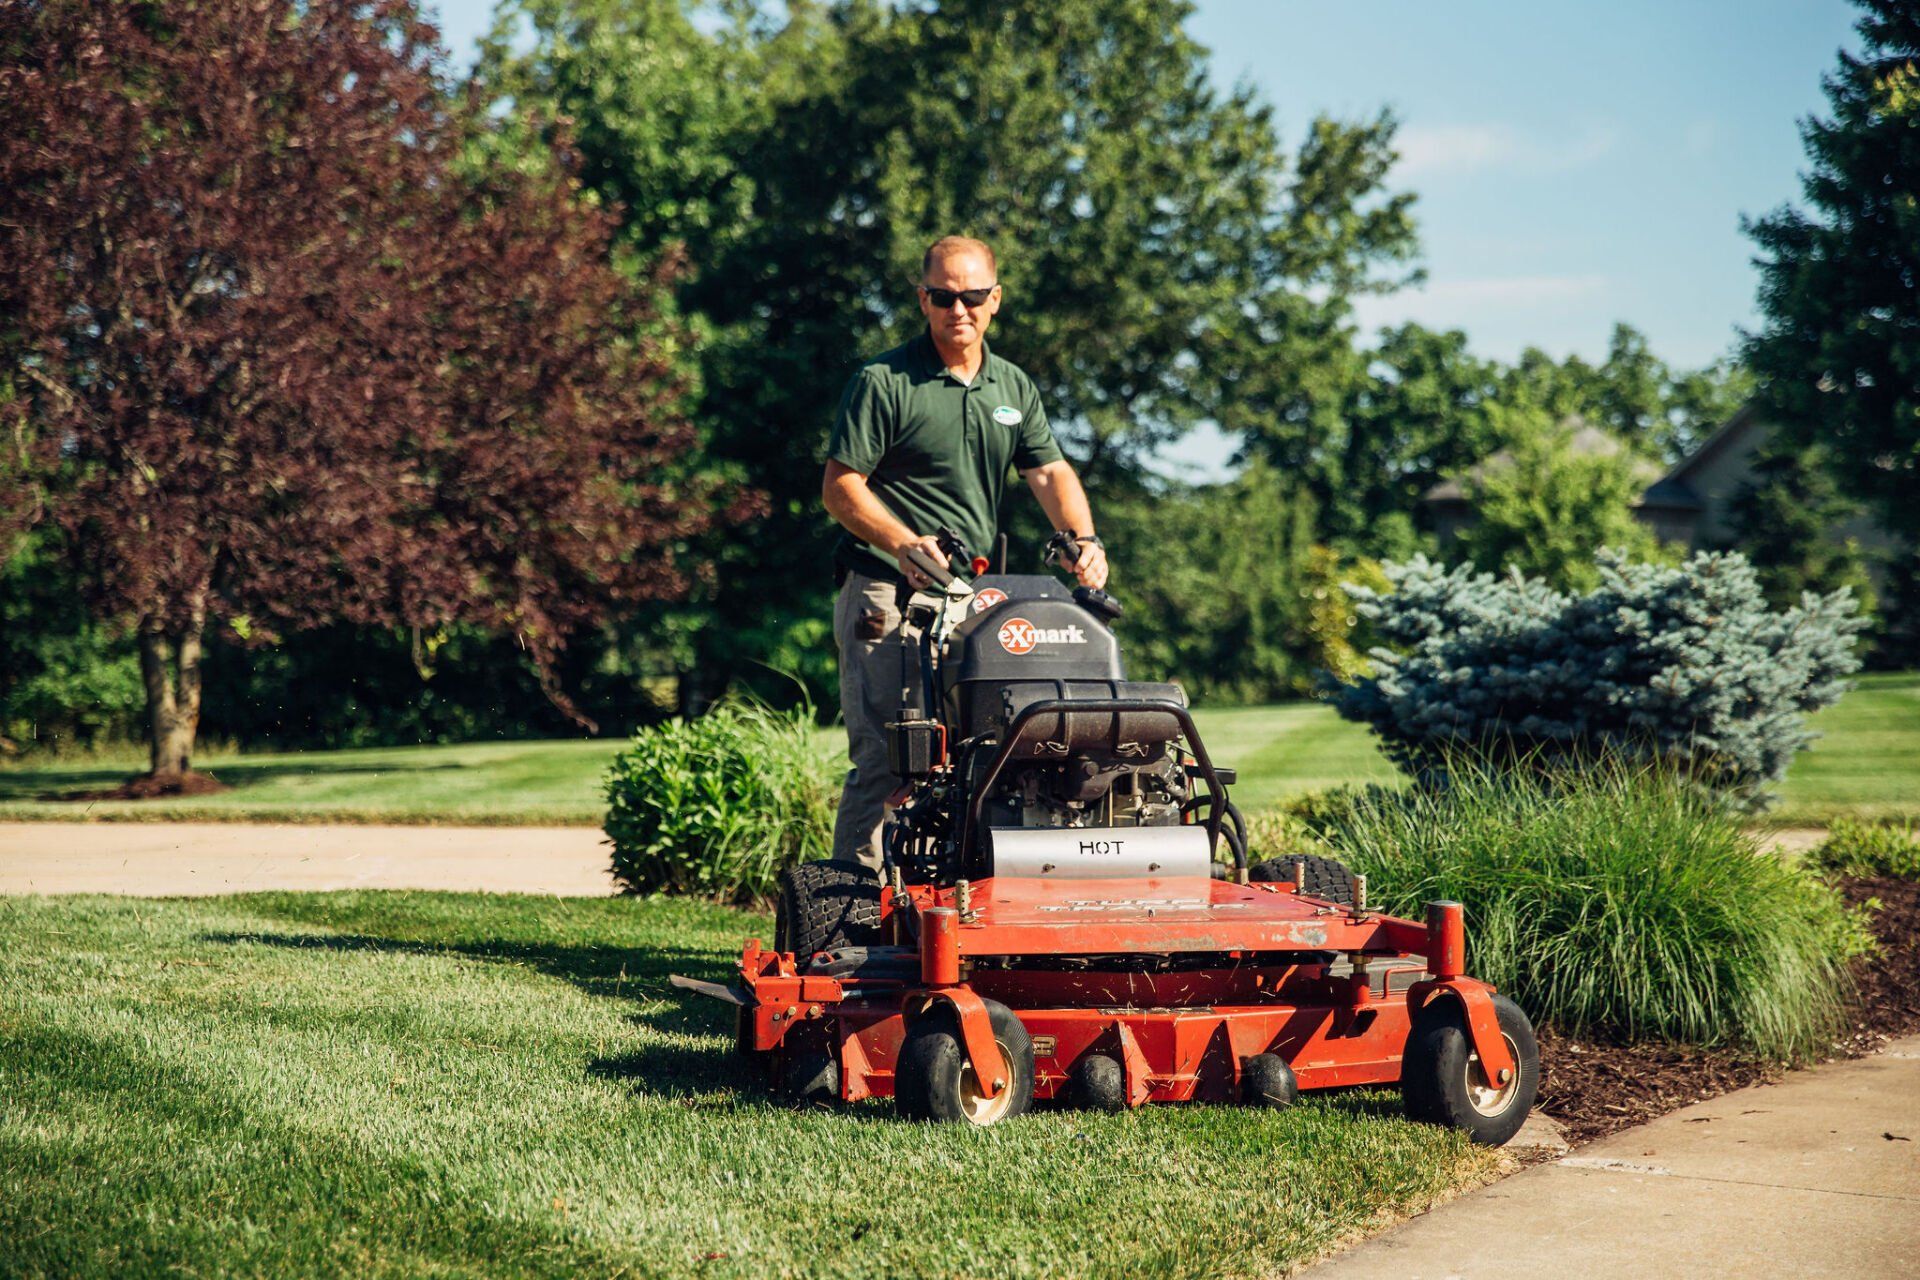 A lawncare professional from Atkins Inc. rides a standing lawn mower and creates a beautiful yard for the clients.